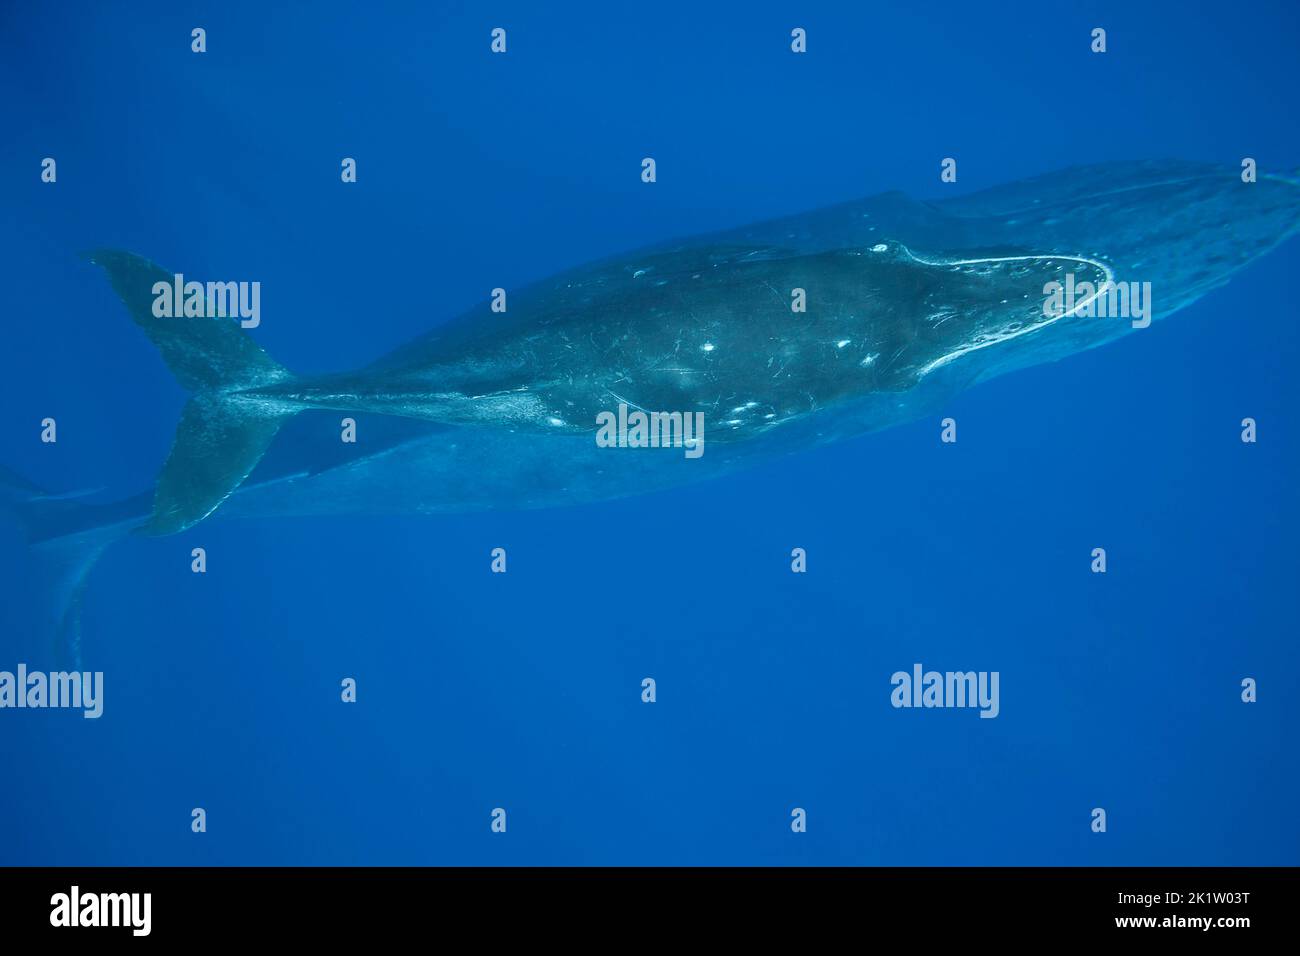 A mother and calf pair of humpback whales, Megaptera novaeangliae, underwater, Hawaii. Stock Photo